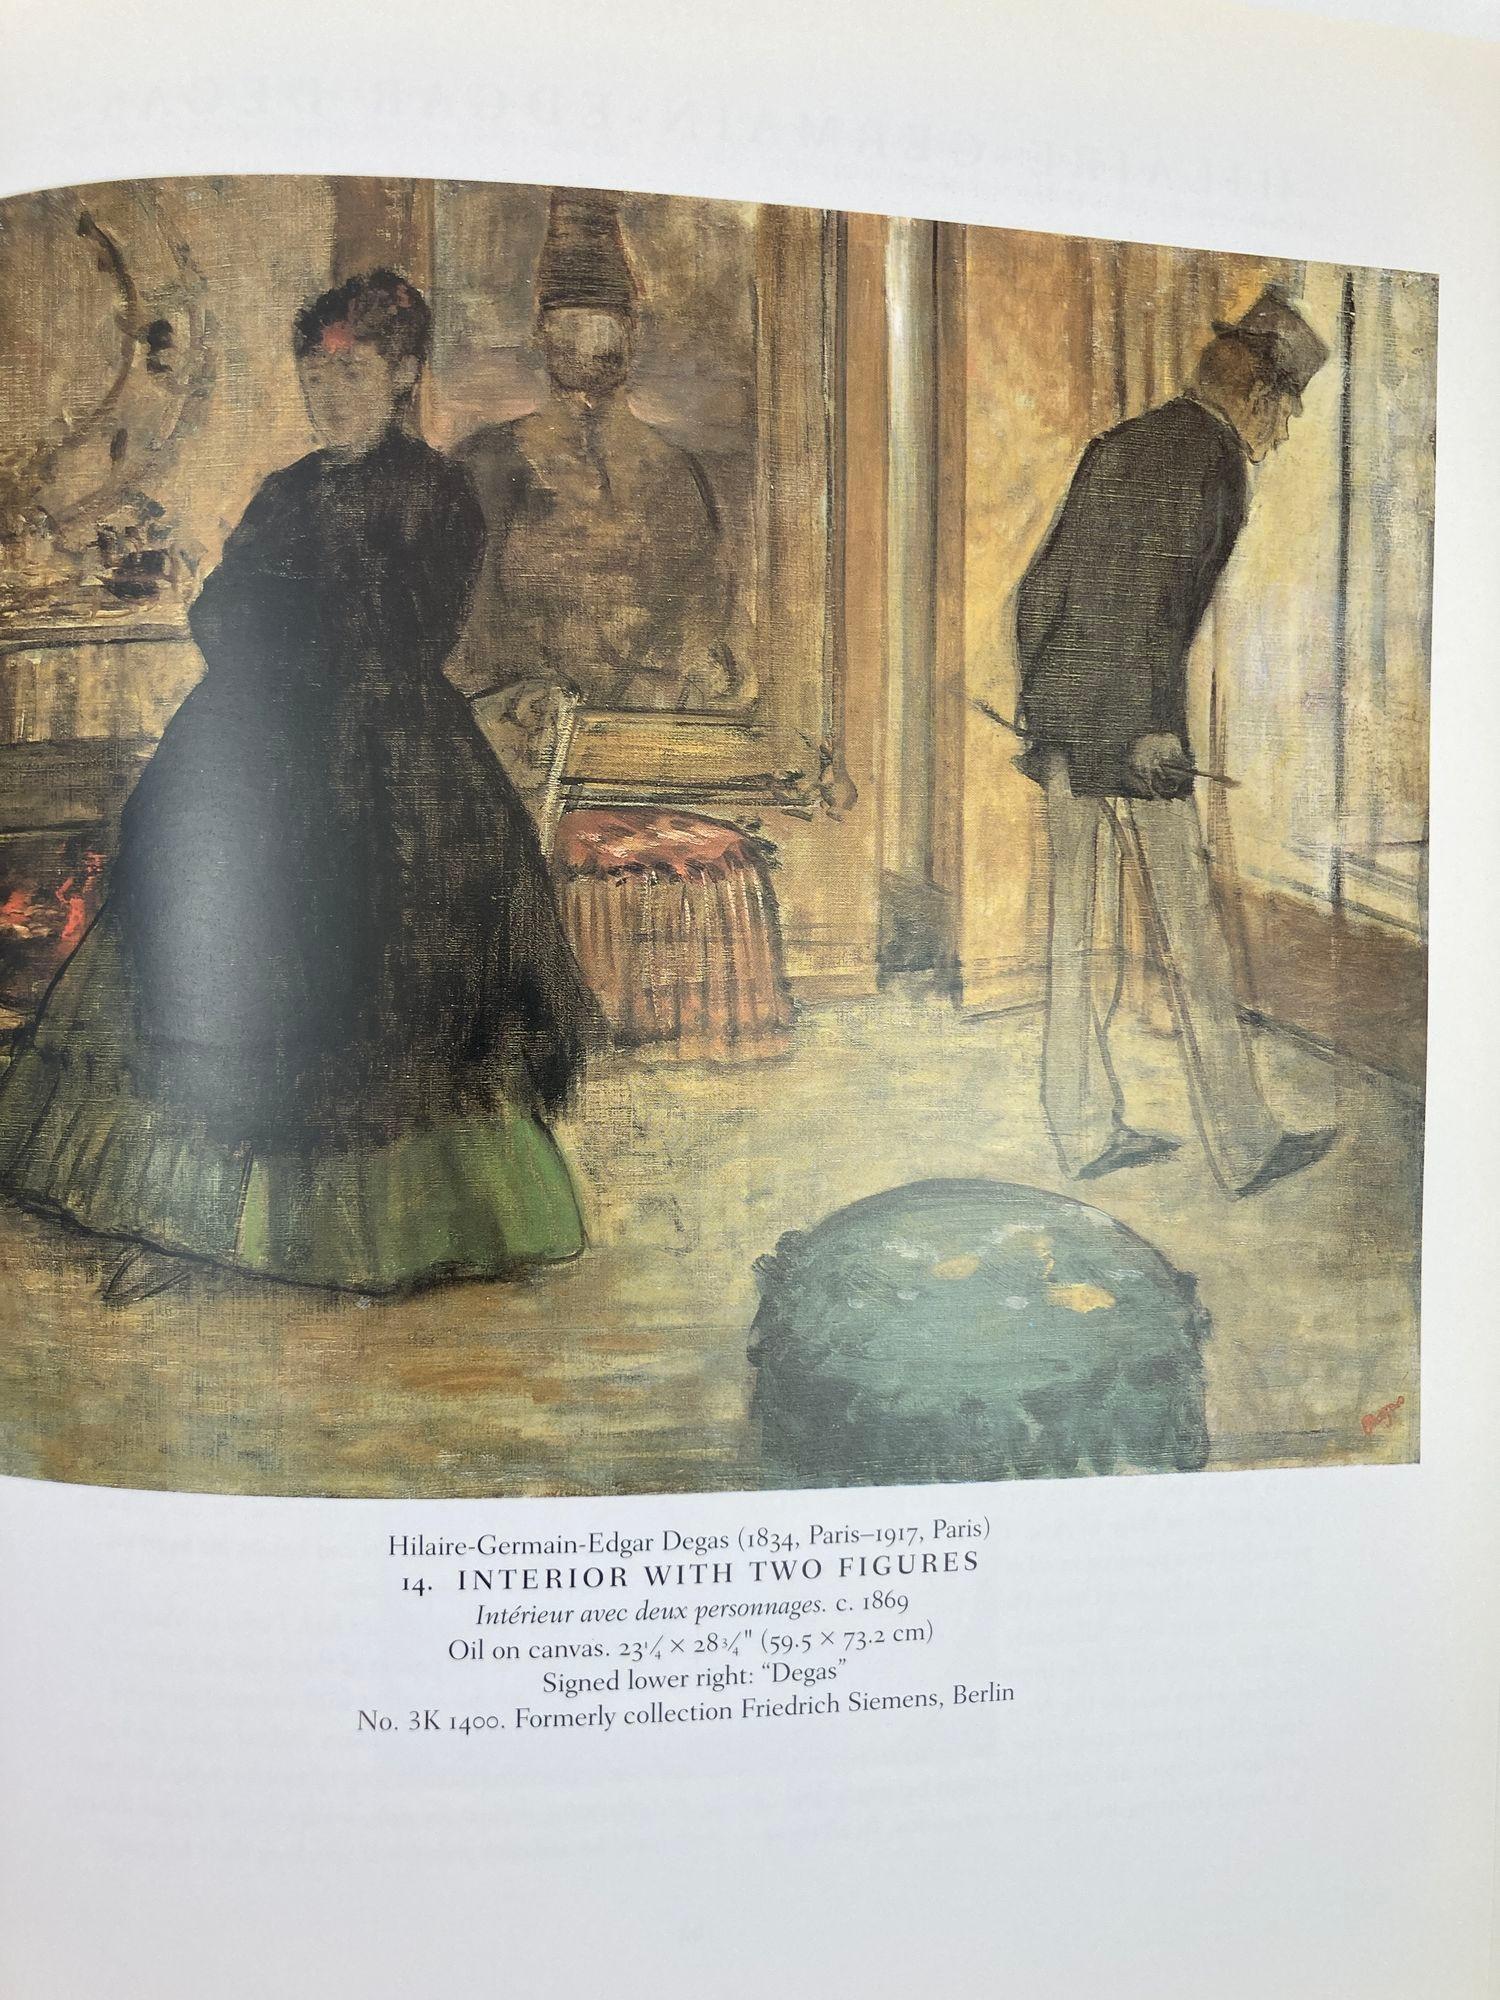 Paper Hidden Treasures Revealed: Impressionist Masterpieces by Albert G. Kostenevich For Sale